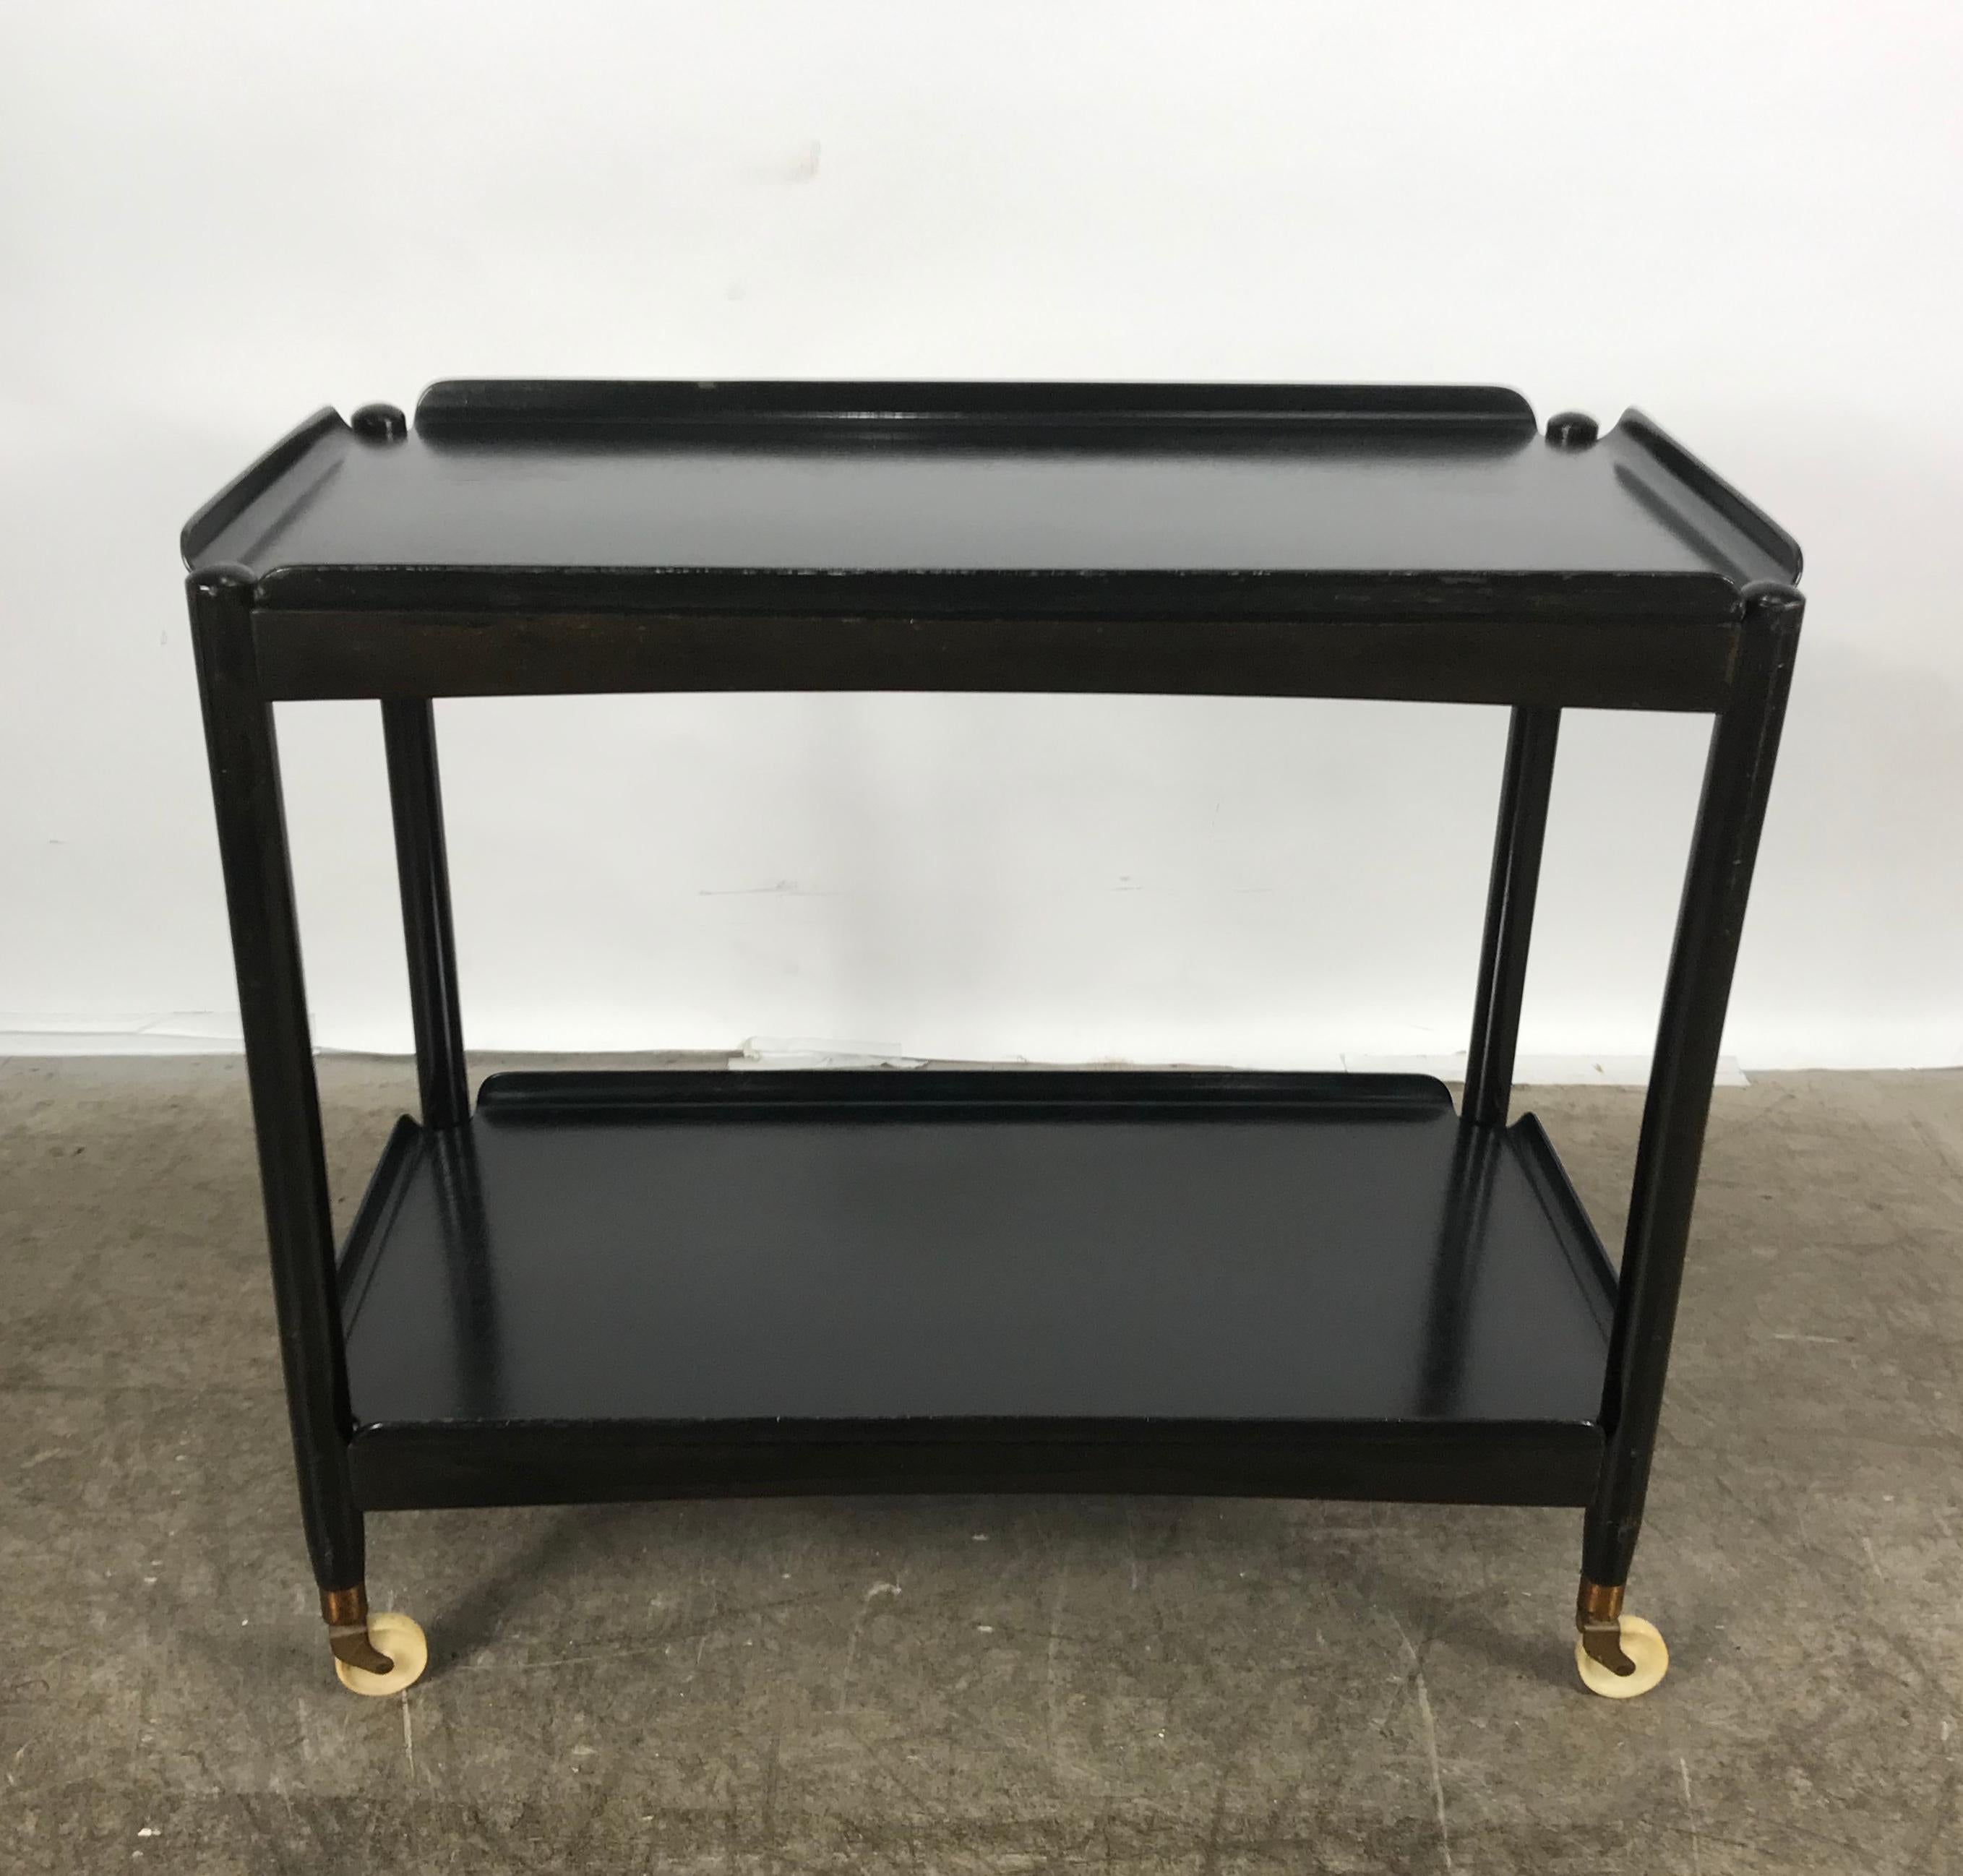 Classic Danish Modernist Two-Tier Collapsible Rolling Tray Table / Serving Cart (Dänisch)